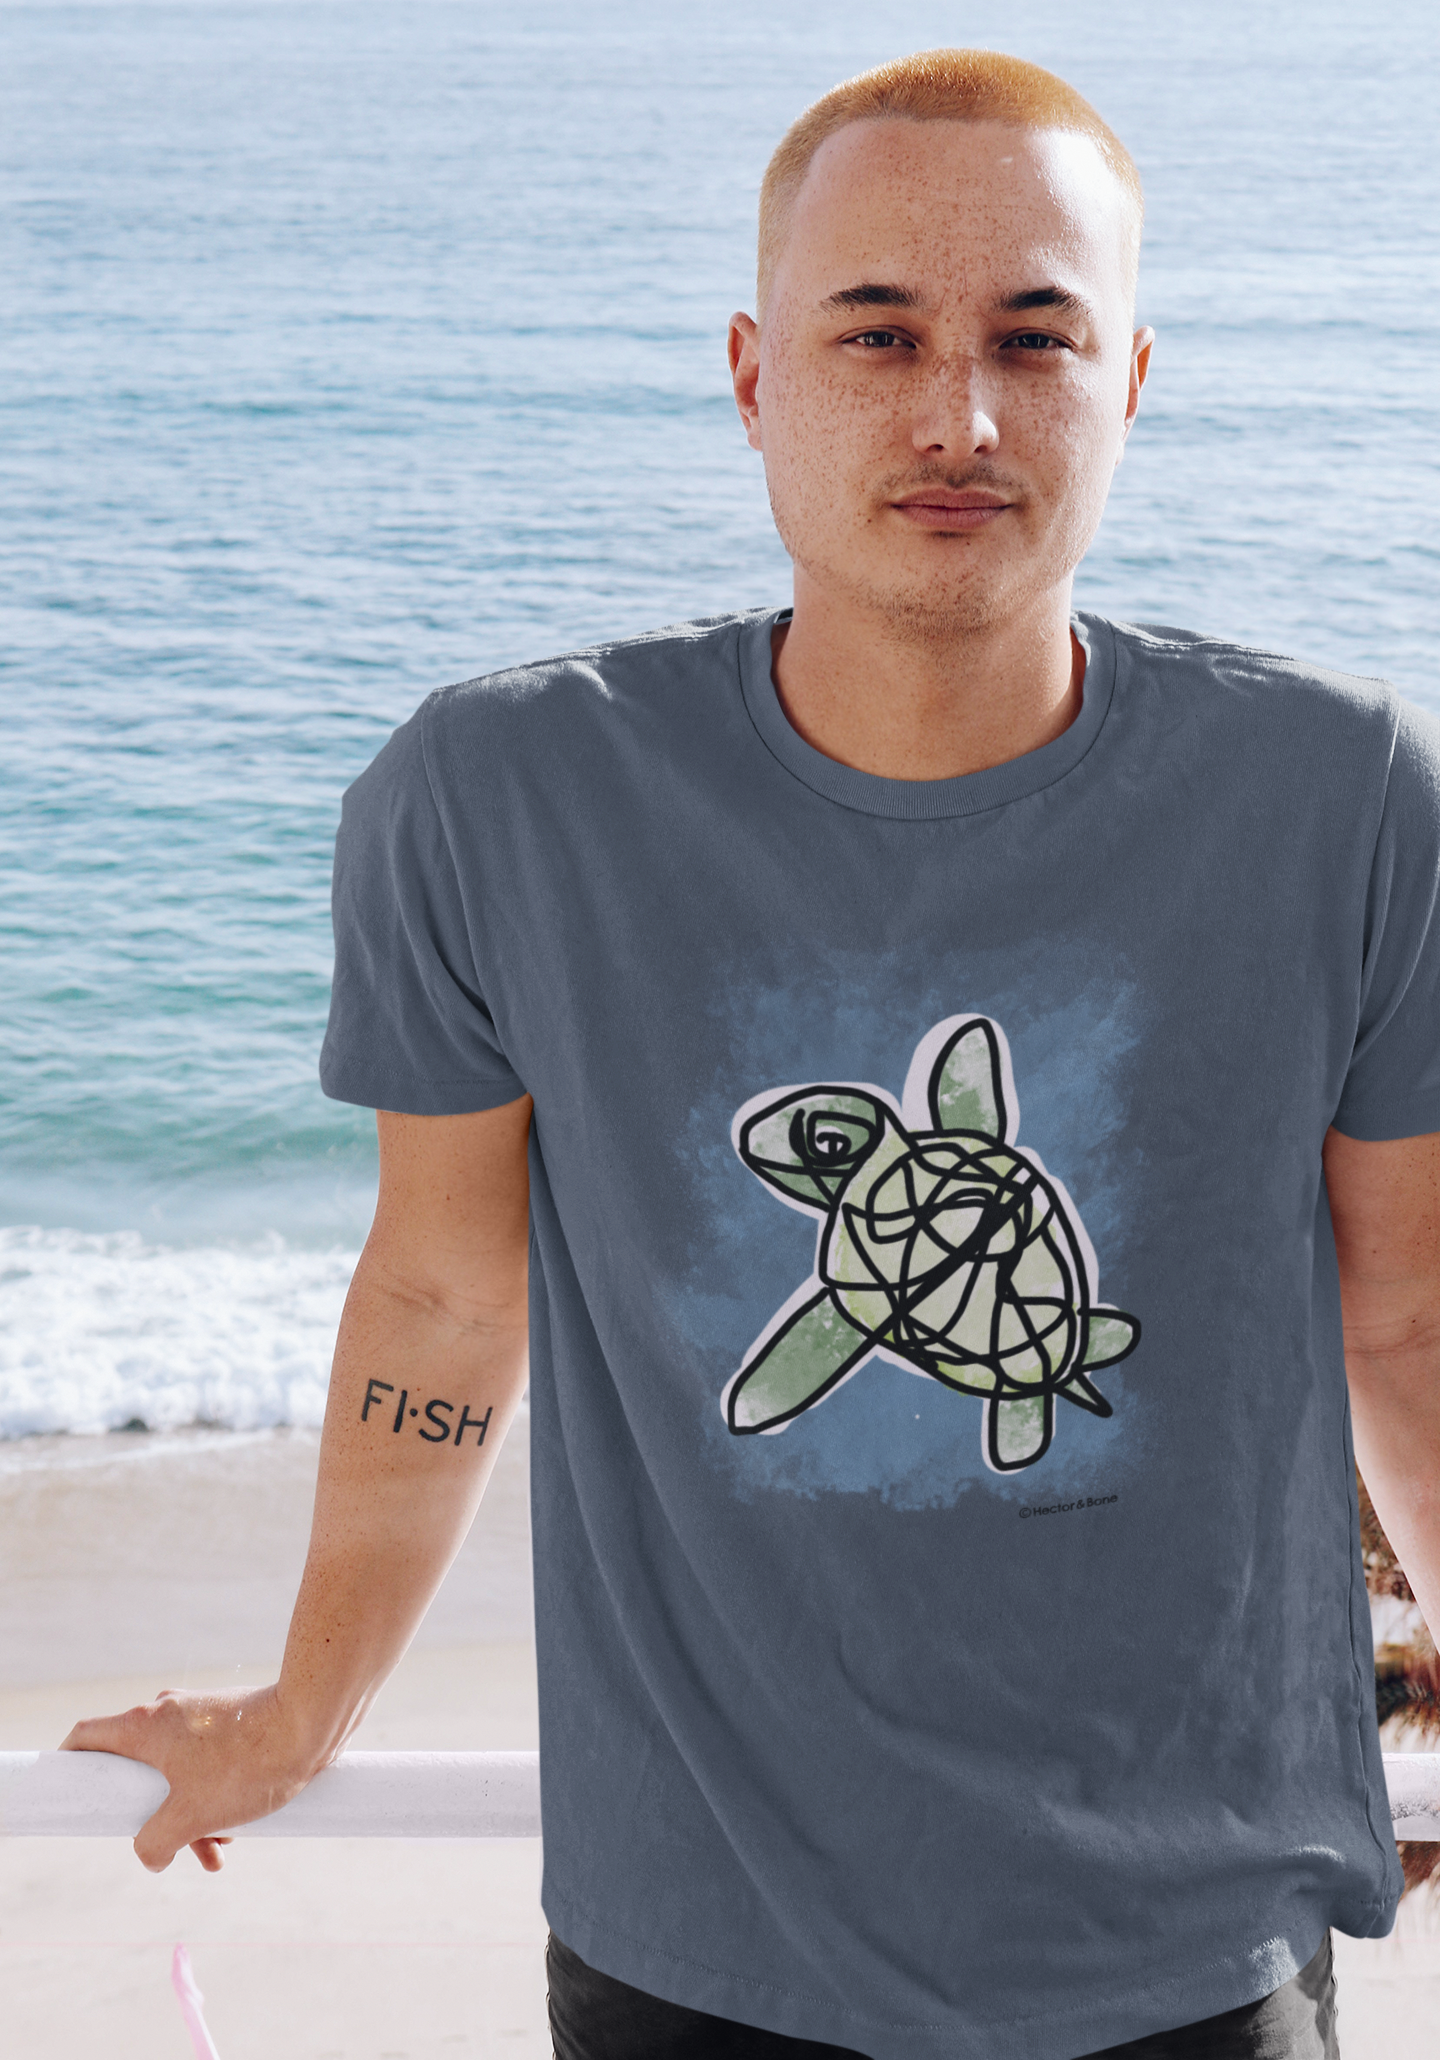 Sea Turtle T-shirt - Young man wearing an illustrated green sea turtle t-shirt by Hector and Bone